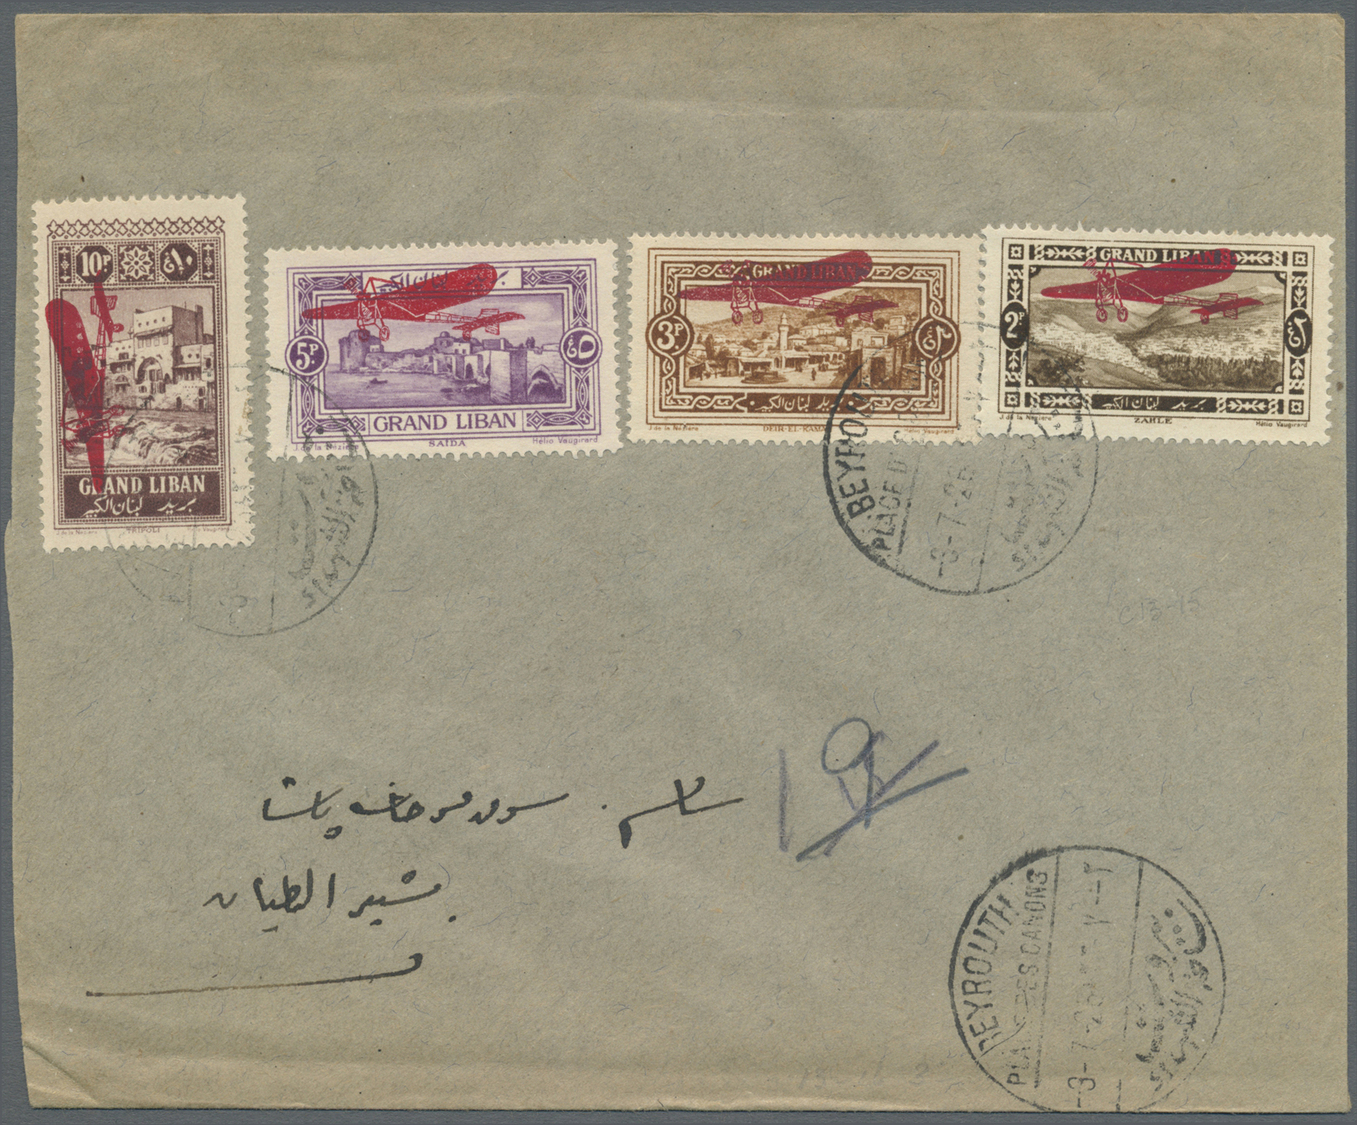 Br Libanon: 1926, Airmails, Red "Plane" Overprint, Complete Set Of Four Values, Attractive Franking On Cover From "BEYRO - Lebanon